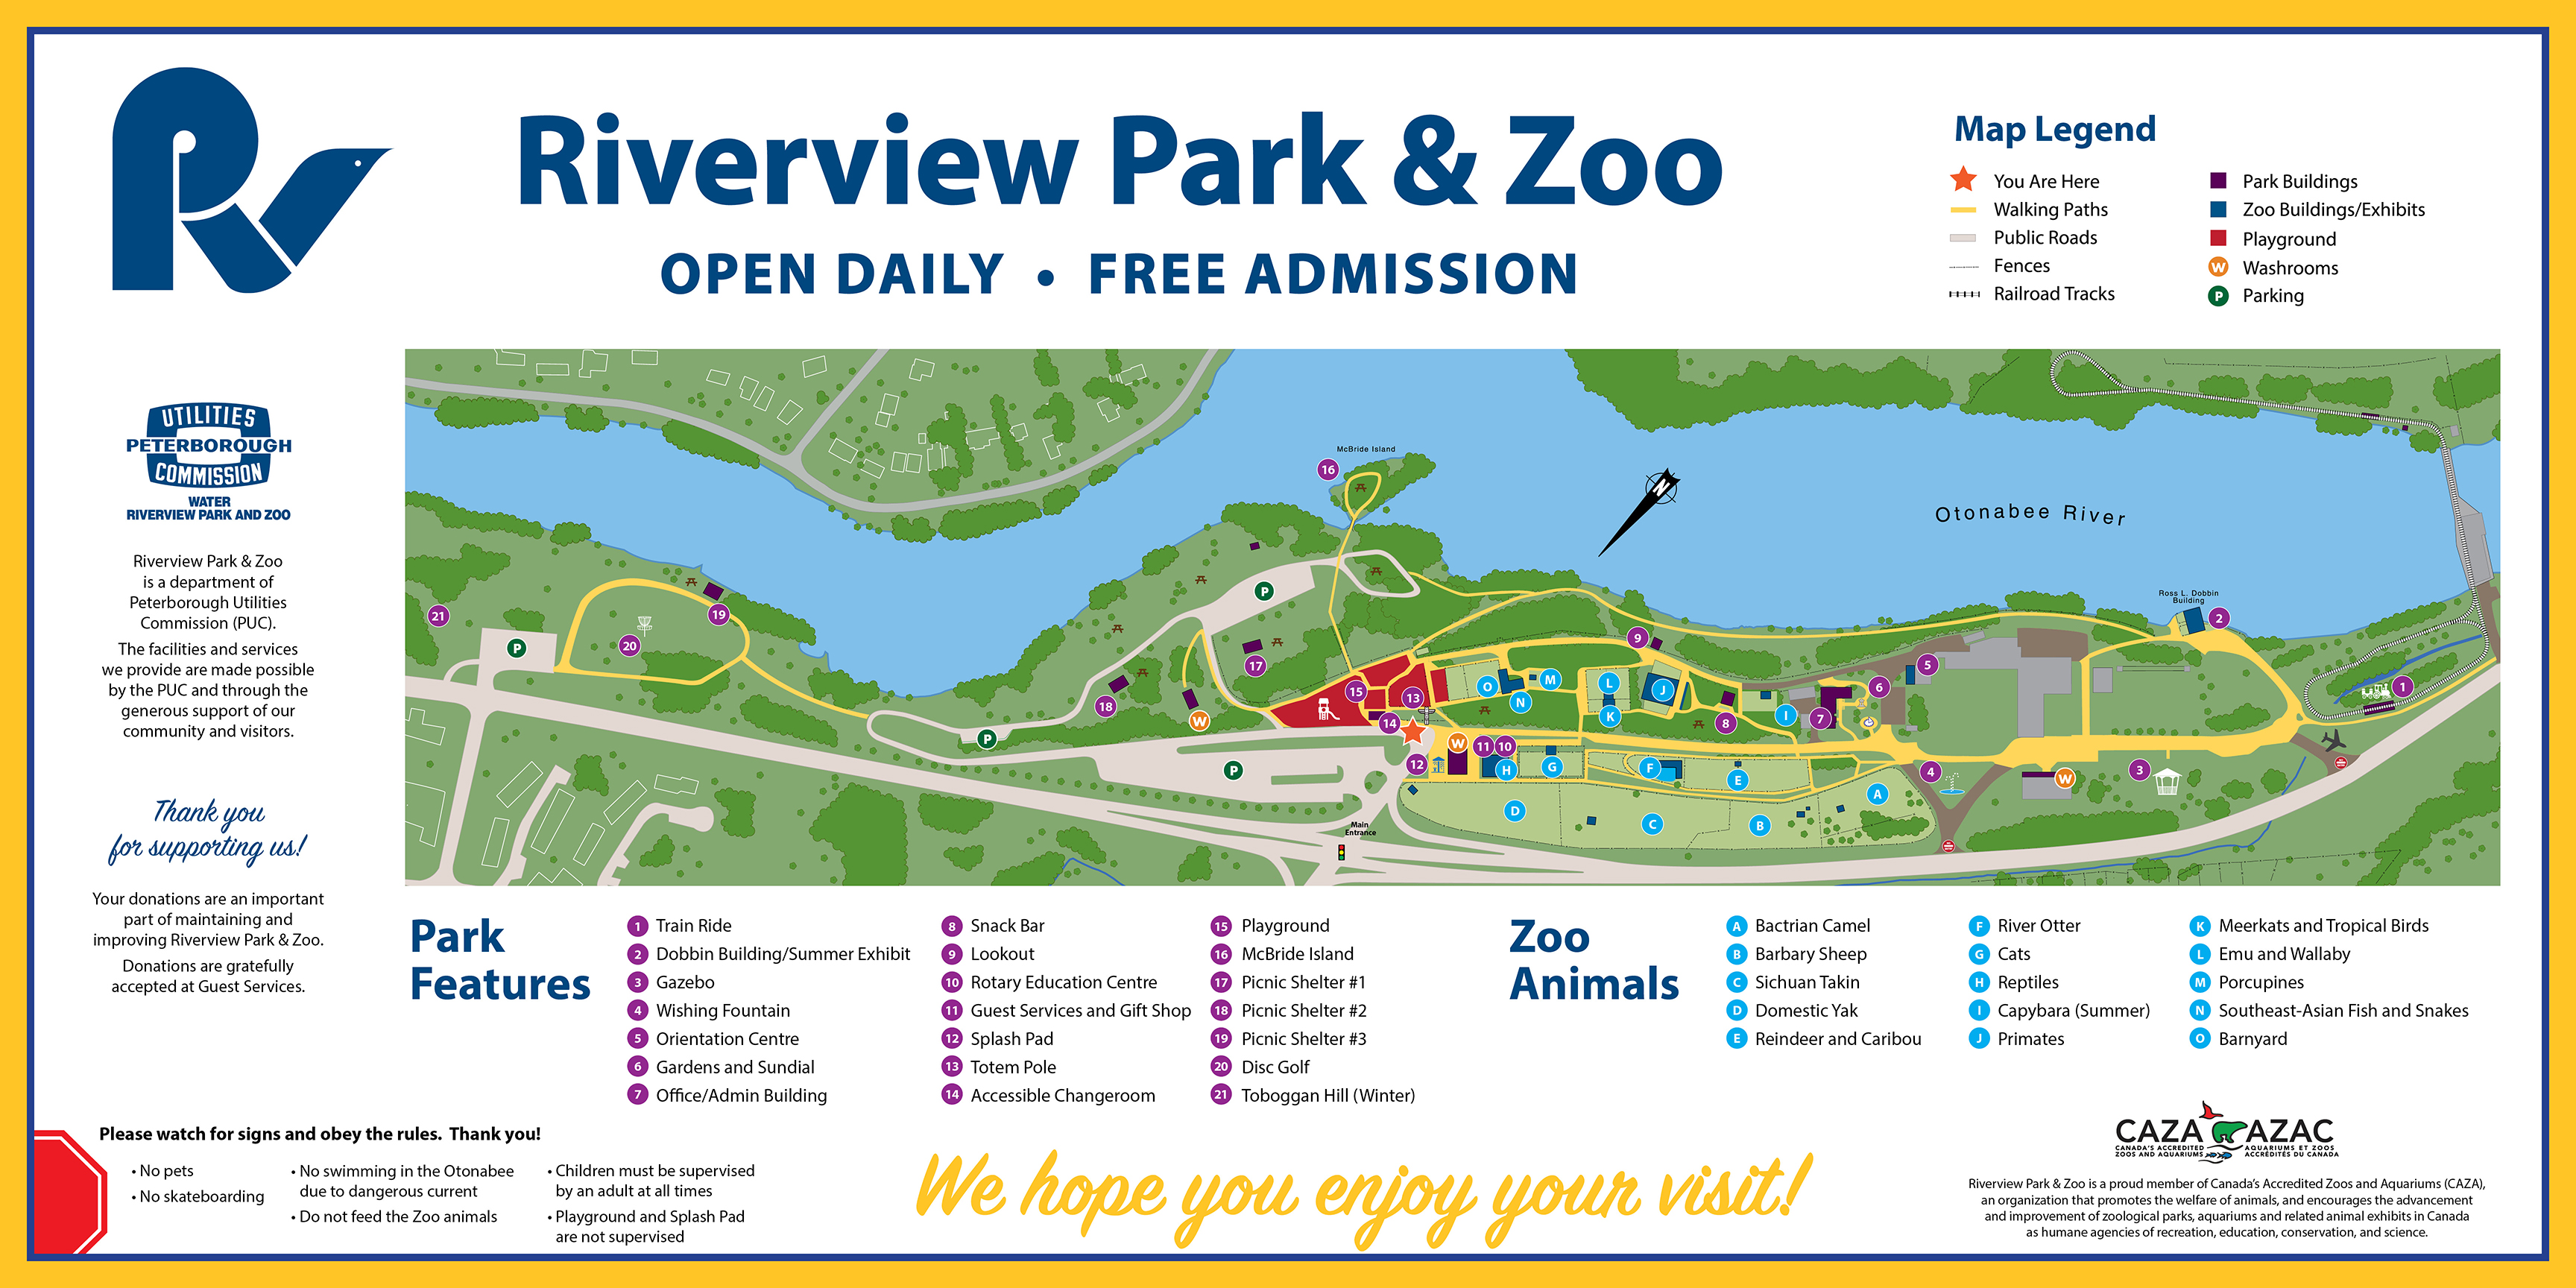 Park and Zoo Site Map and Legend to facilities and exhibits